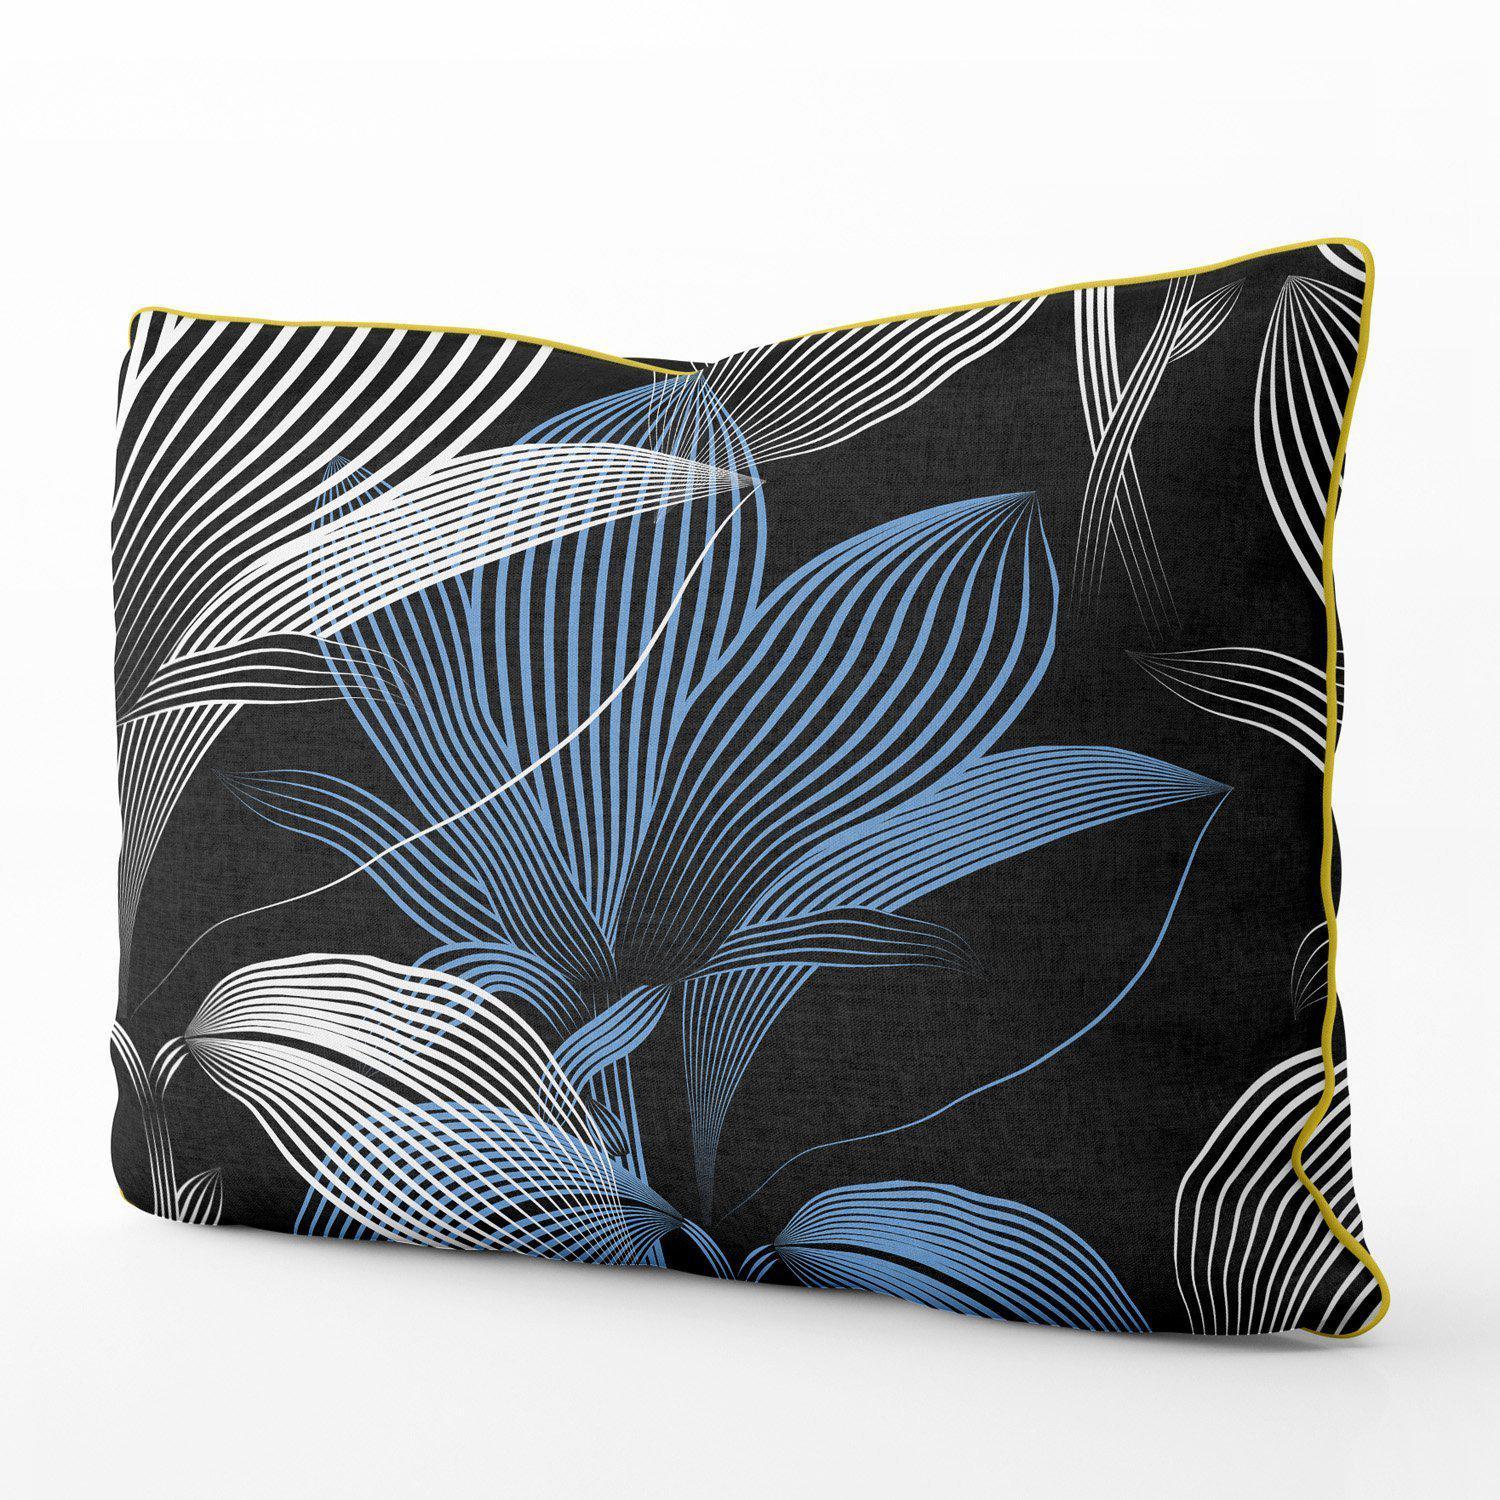 Linear Florals - Funky Art Cushion - Perfect Day - House Of Turnowsky Pillows - Handmade Cushions UK - WeLoveCushions